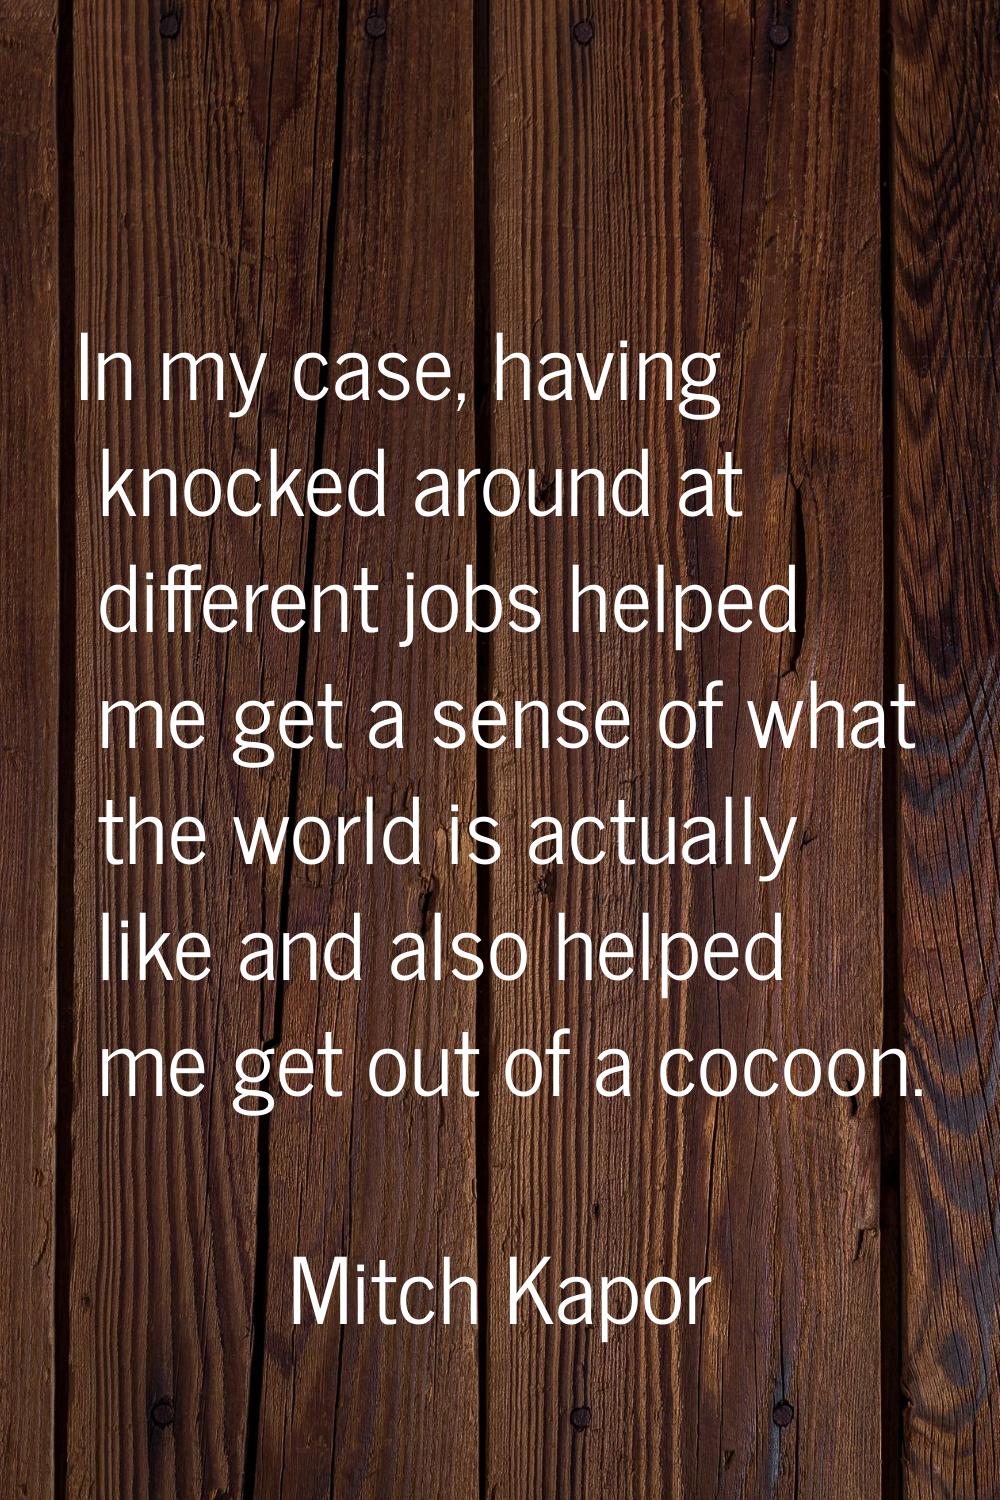 In my case, having knocked around at different jobs helped me get a sense of what the world is actu